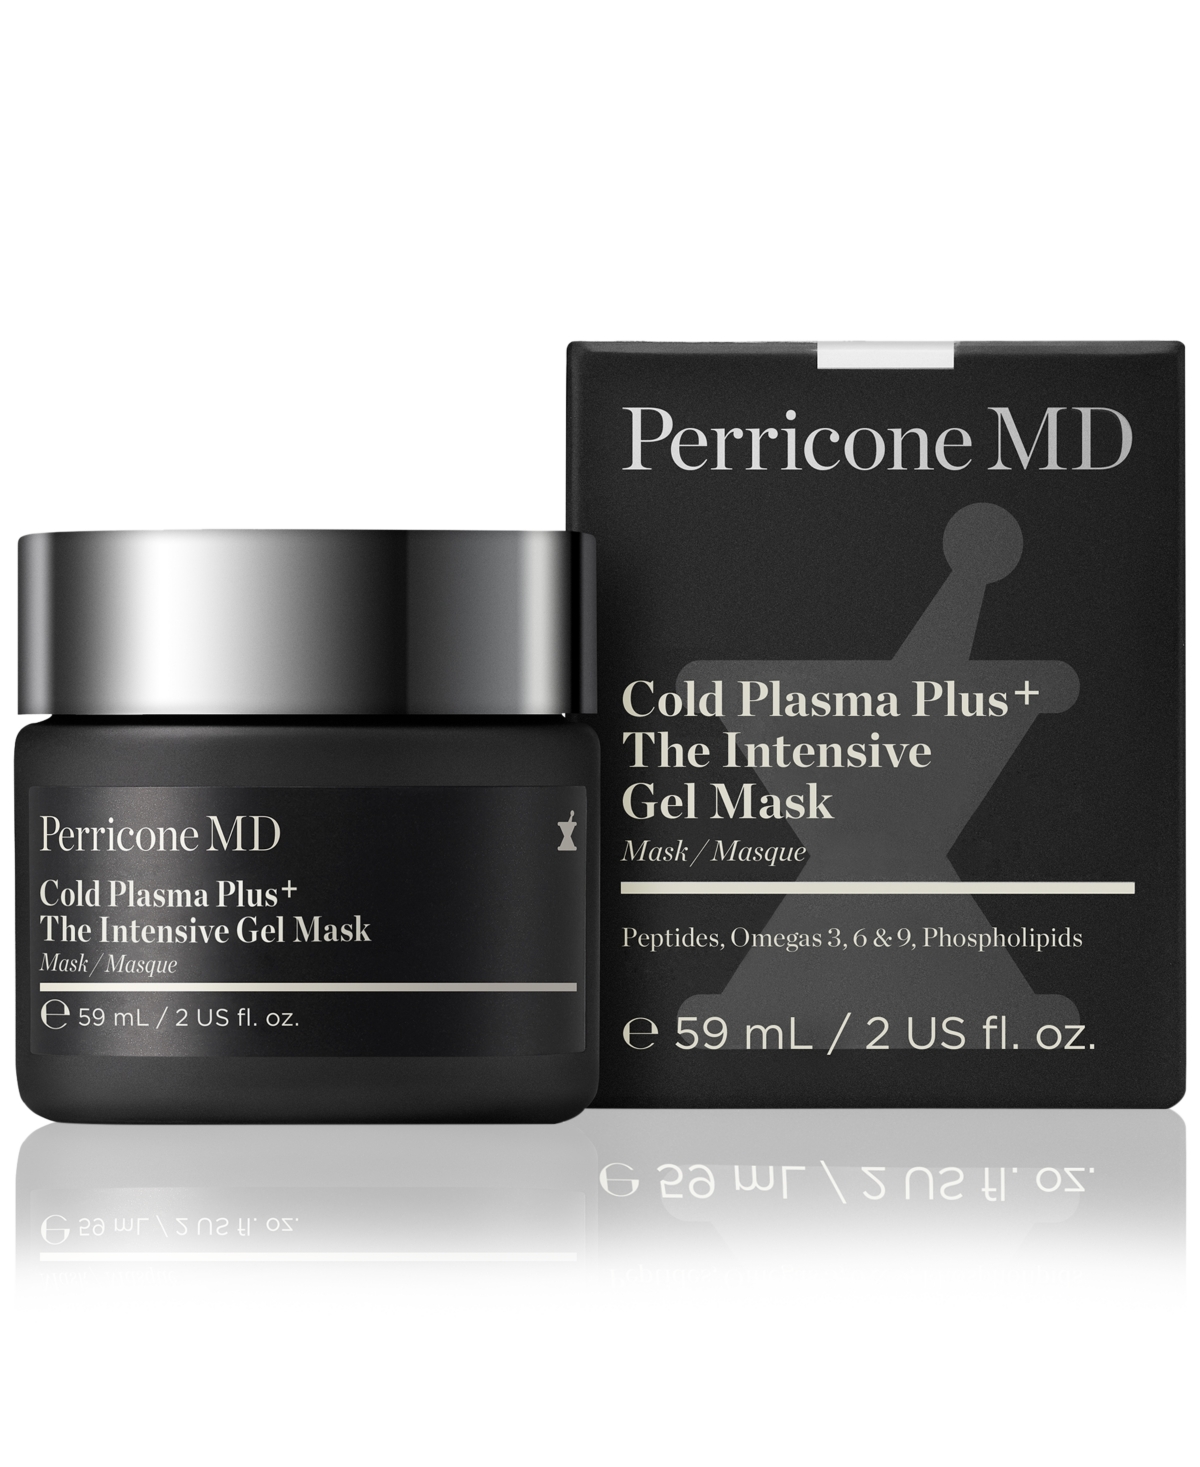 Perricone Md Cold Plasma Plus+ The Intensive Gel Mask, 2 Oz. In No Color